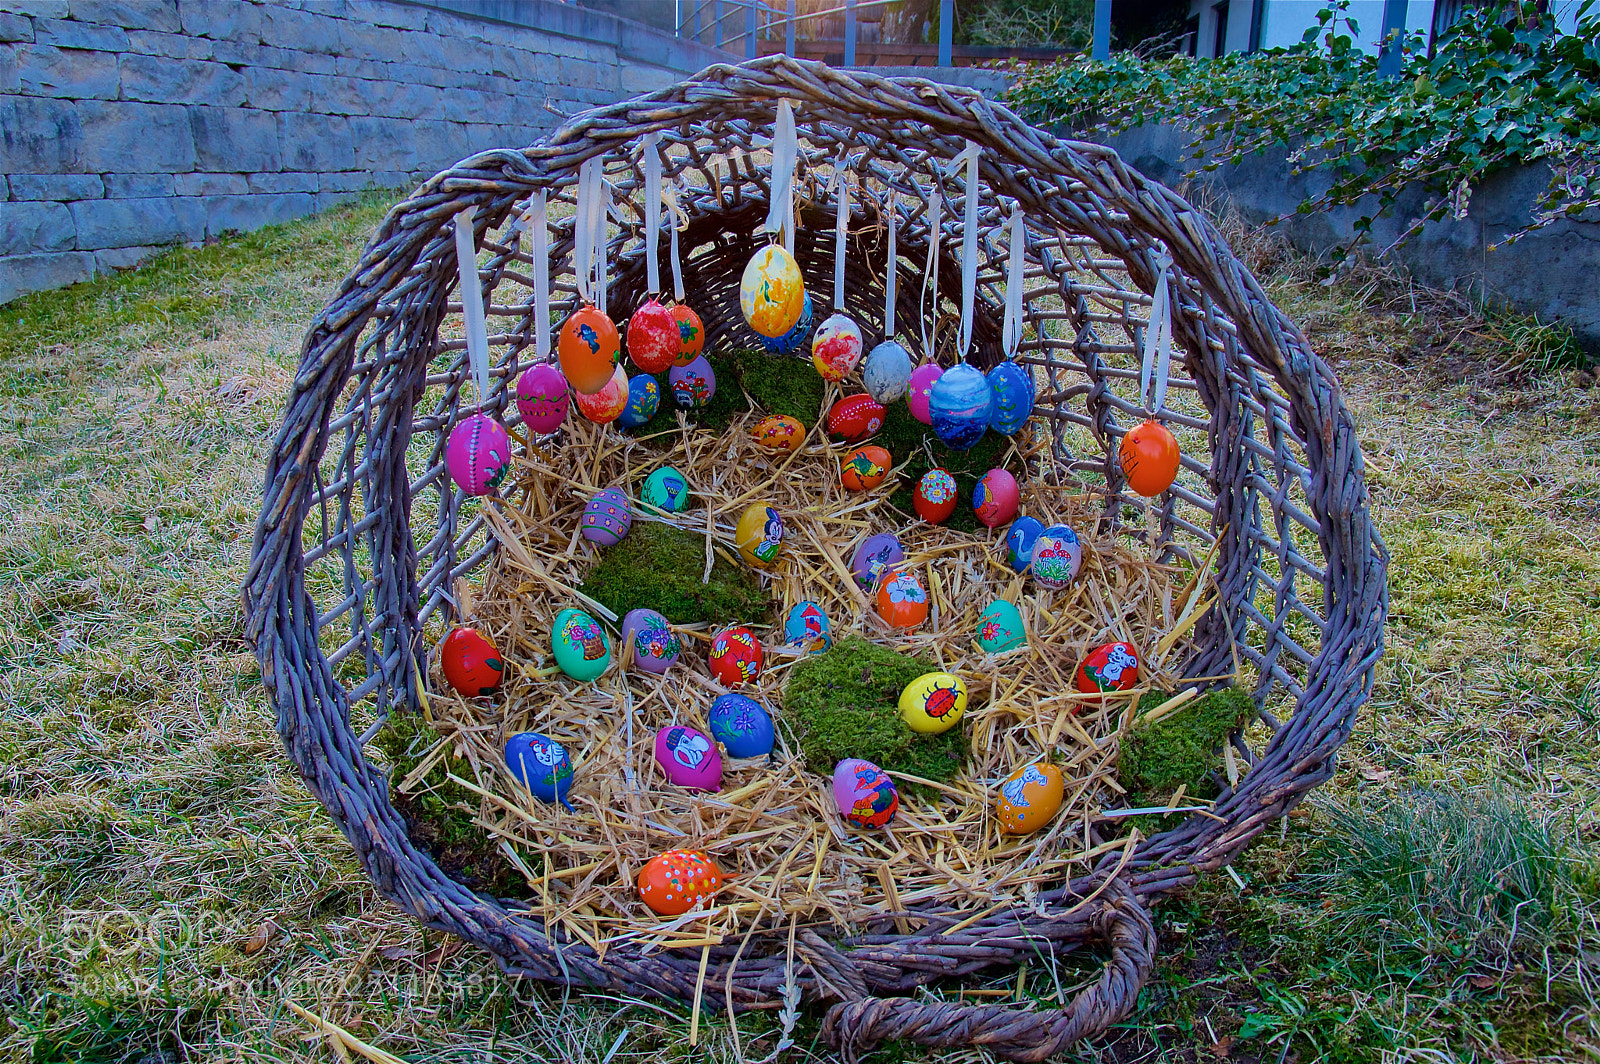 Pentax K-3 II sample photo. Easter tradition photography